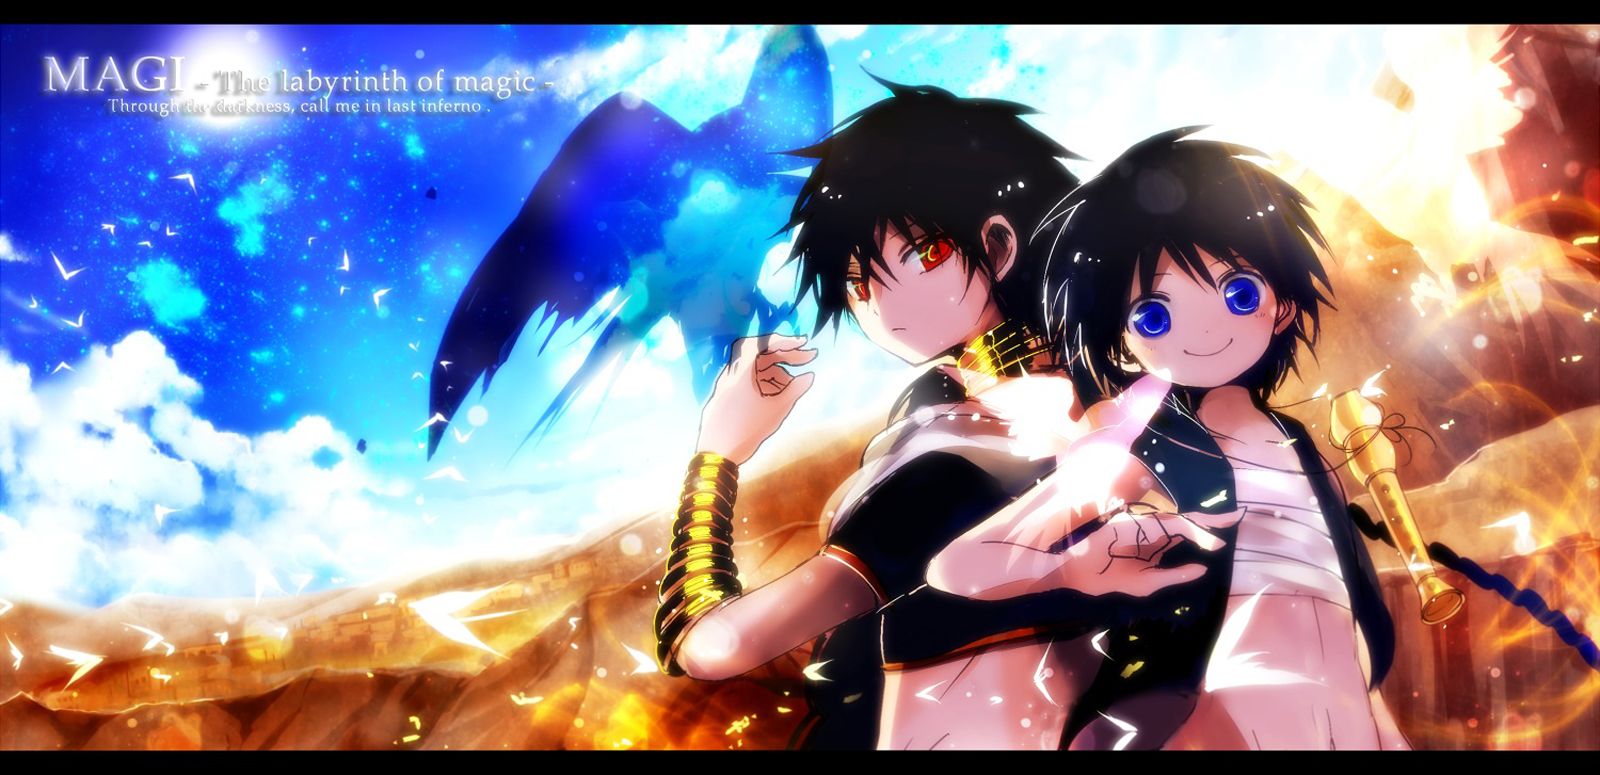 Magi: The Labyrinth Of Magic Anime Wallpapers - Wallpaper Cave